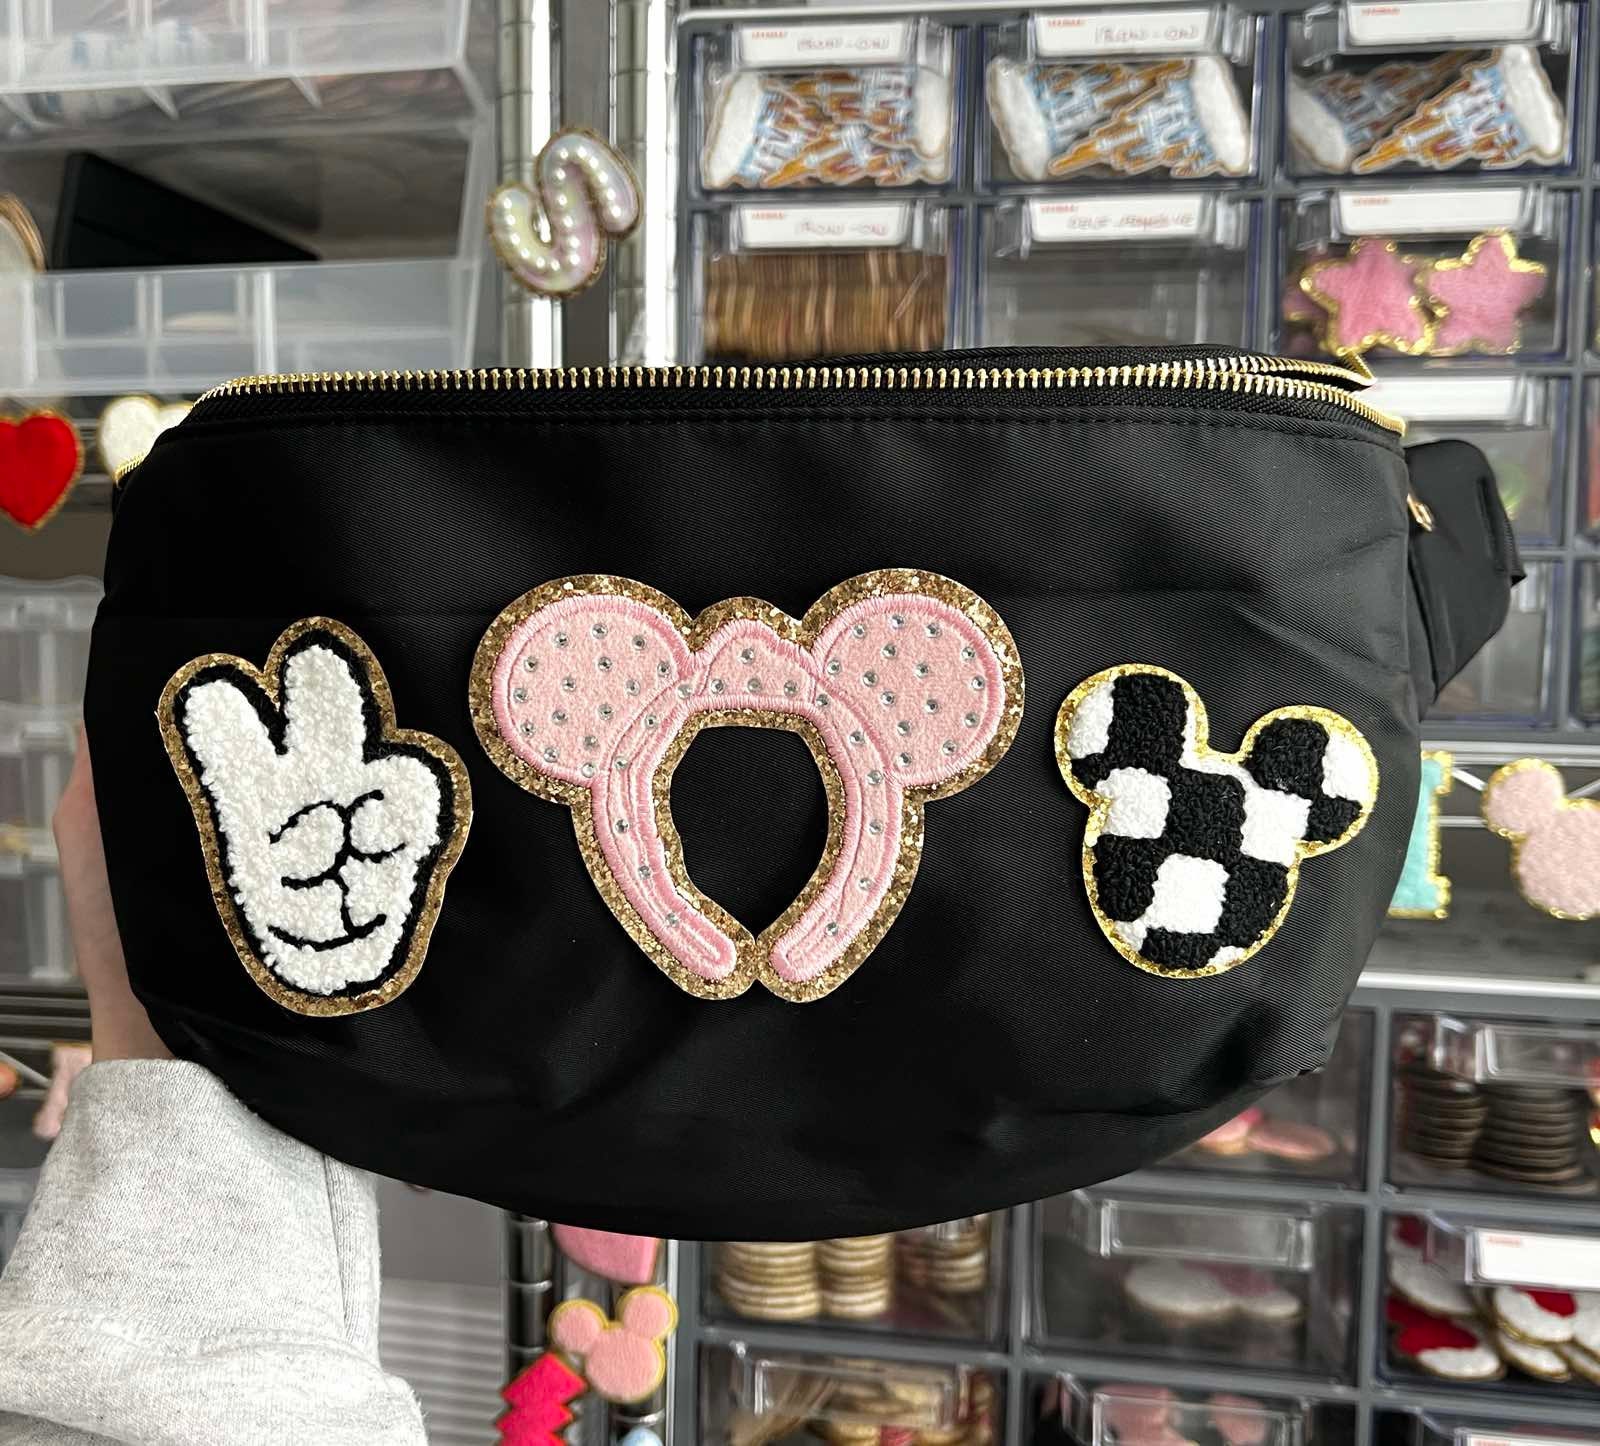  Disney Fanny Pack Disney Gifts for Adults and Kids Mickey Mouse  Fanny Pack Crossbody Bag Disney Gifts for Women Adults Disney Girls Fanny  Pack Mickey Mouse Gifts for Women (One Size